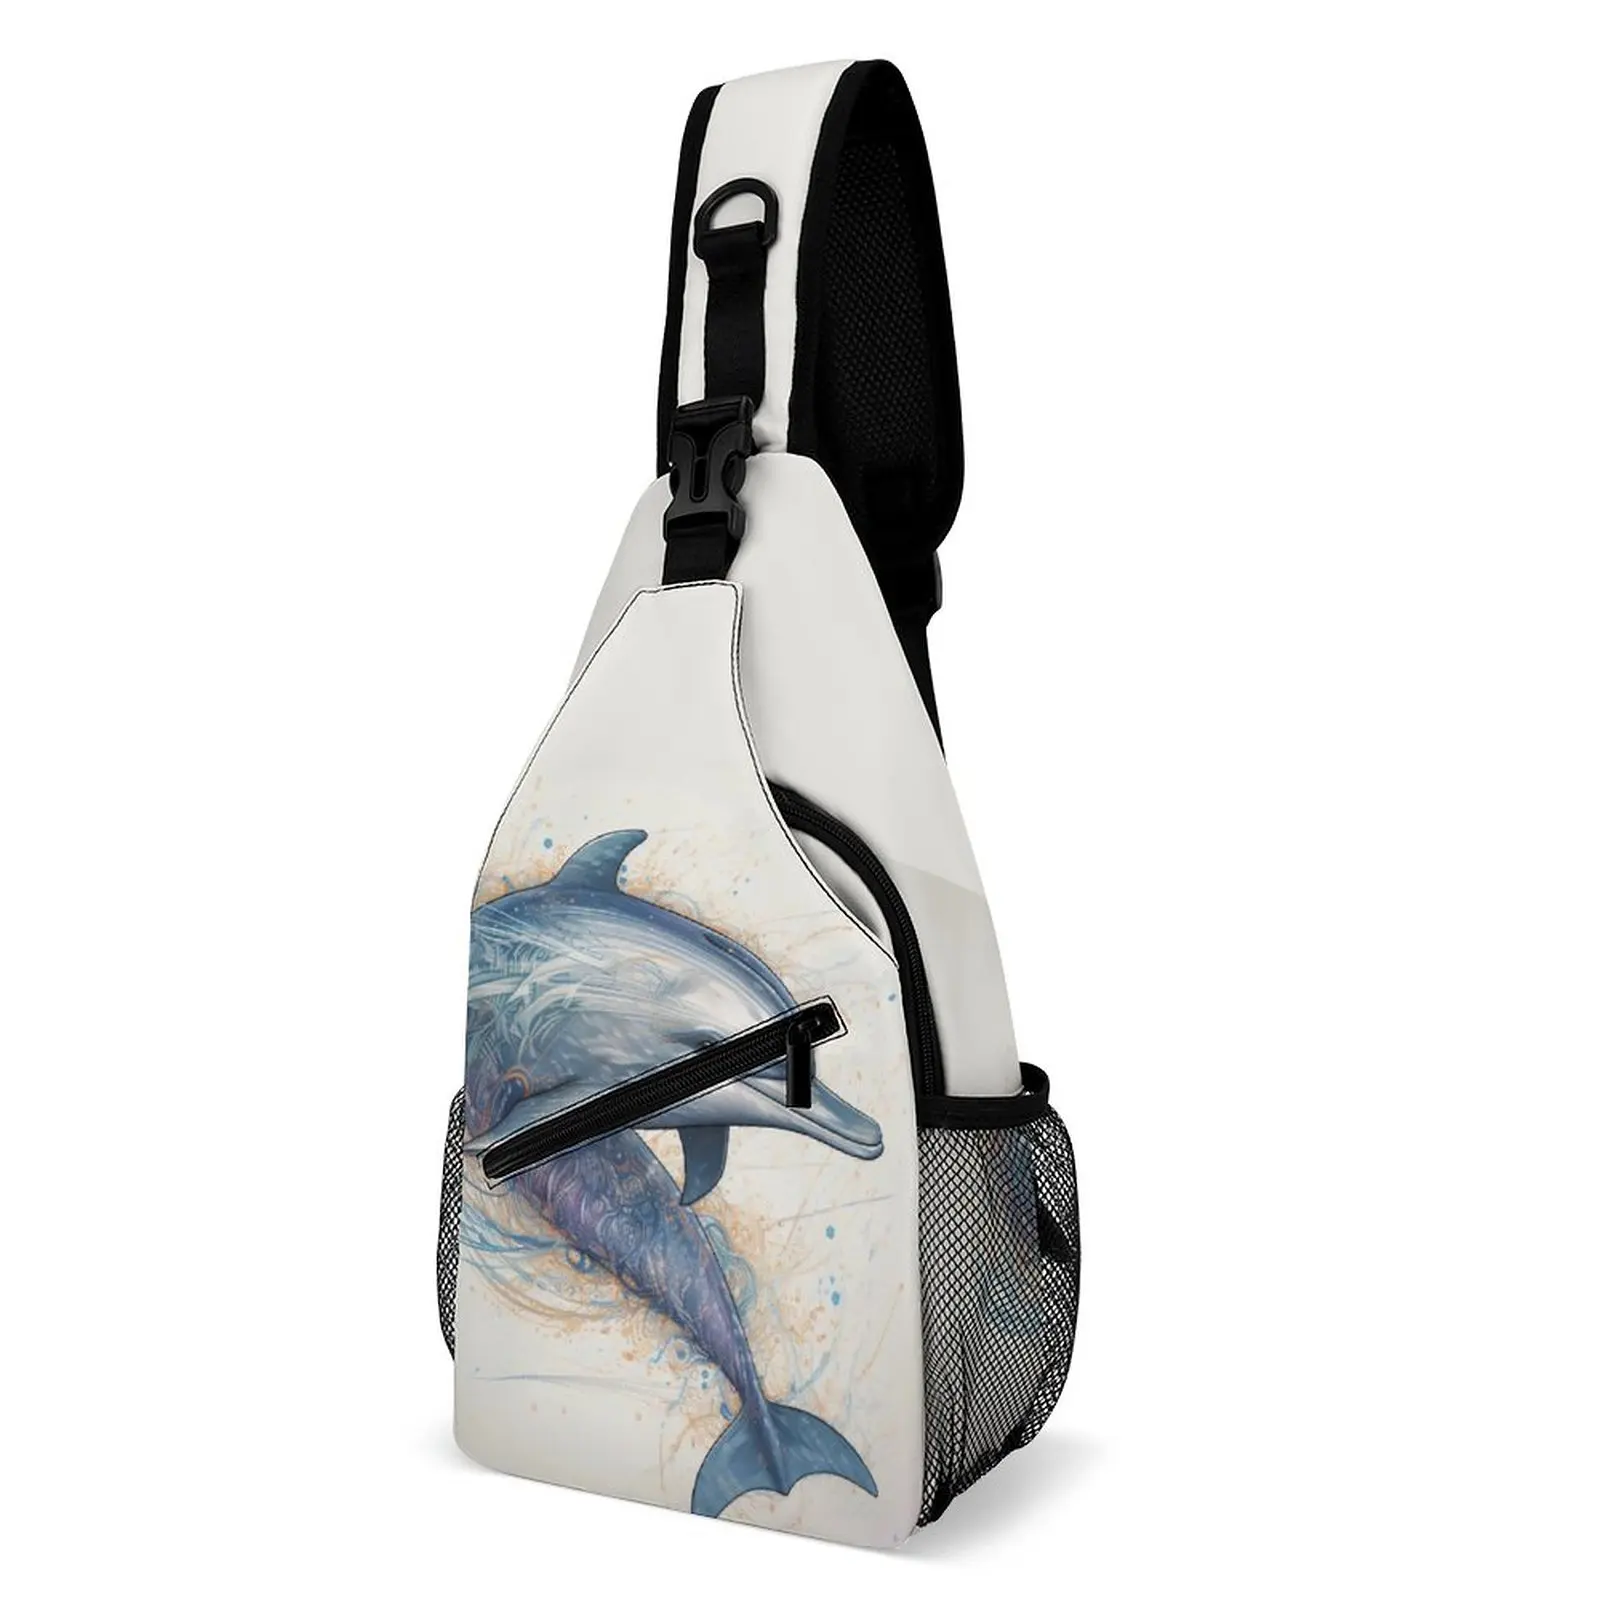 

Dolphin Shoulder Bags Realistic Cartoon Cute Chest Bag Male Phone Cycling Sling Bag Outdoor Print Crossbody Bags